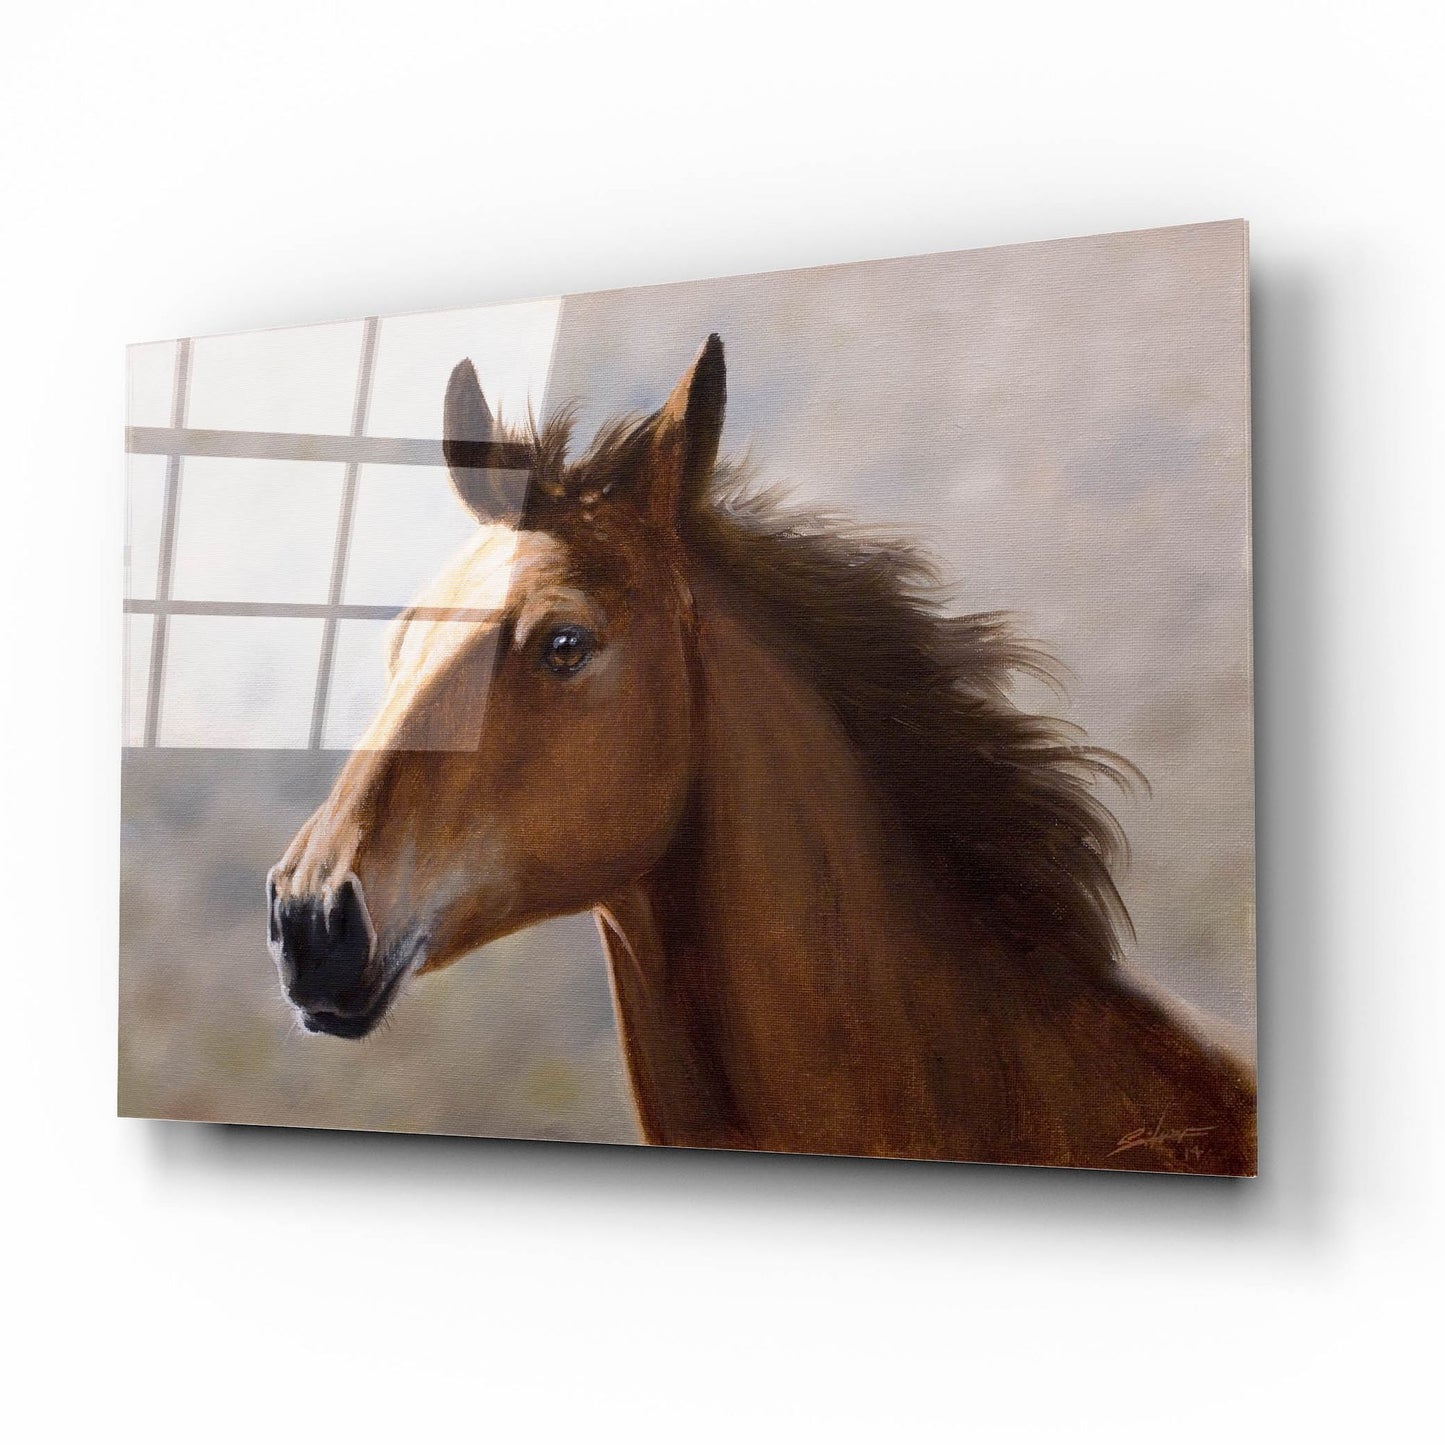 Epic Art 'Horse Thoughts' by John Silver, Acrylic Glass Wall Art,16x12